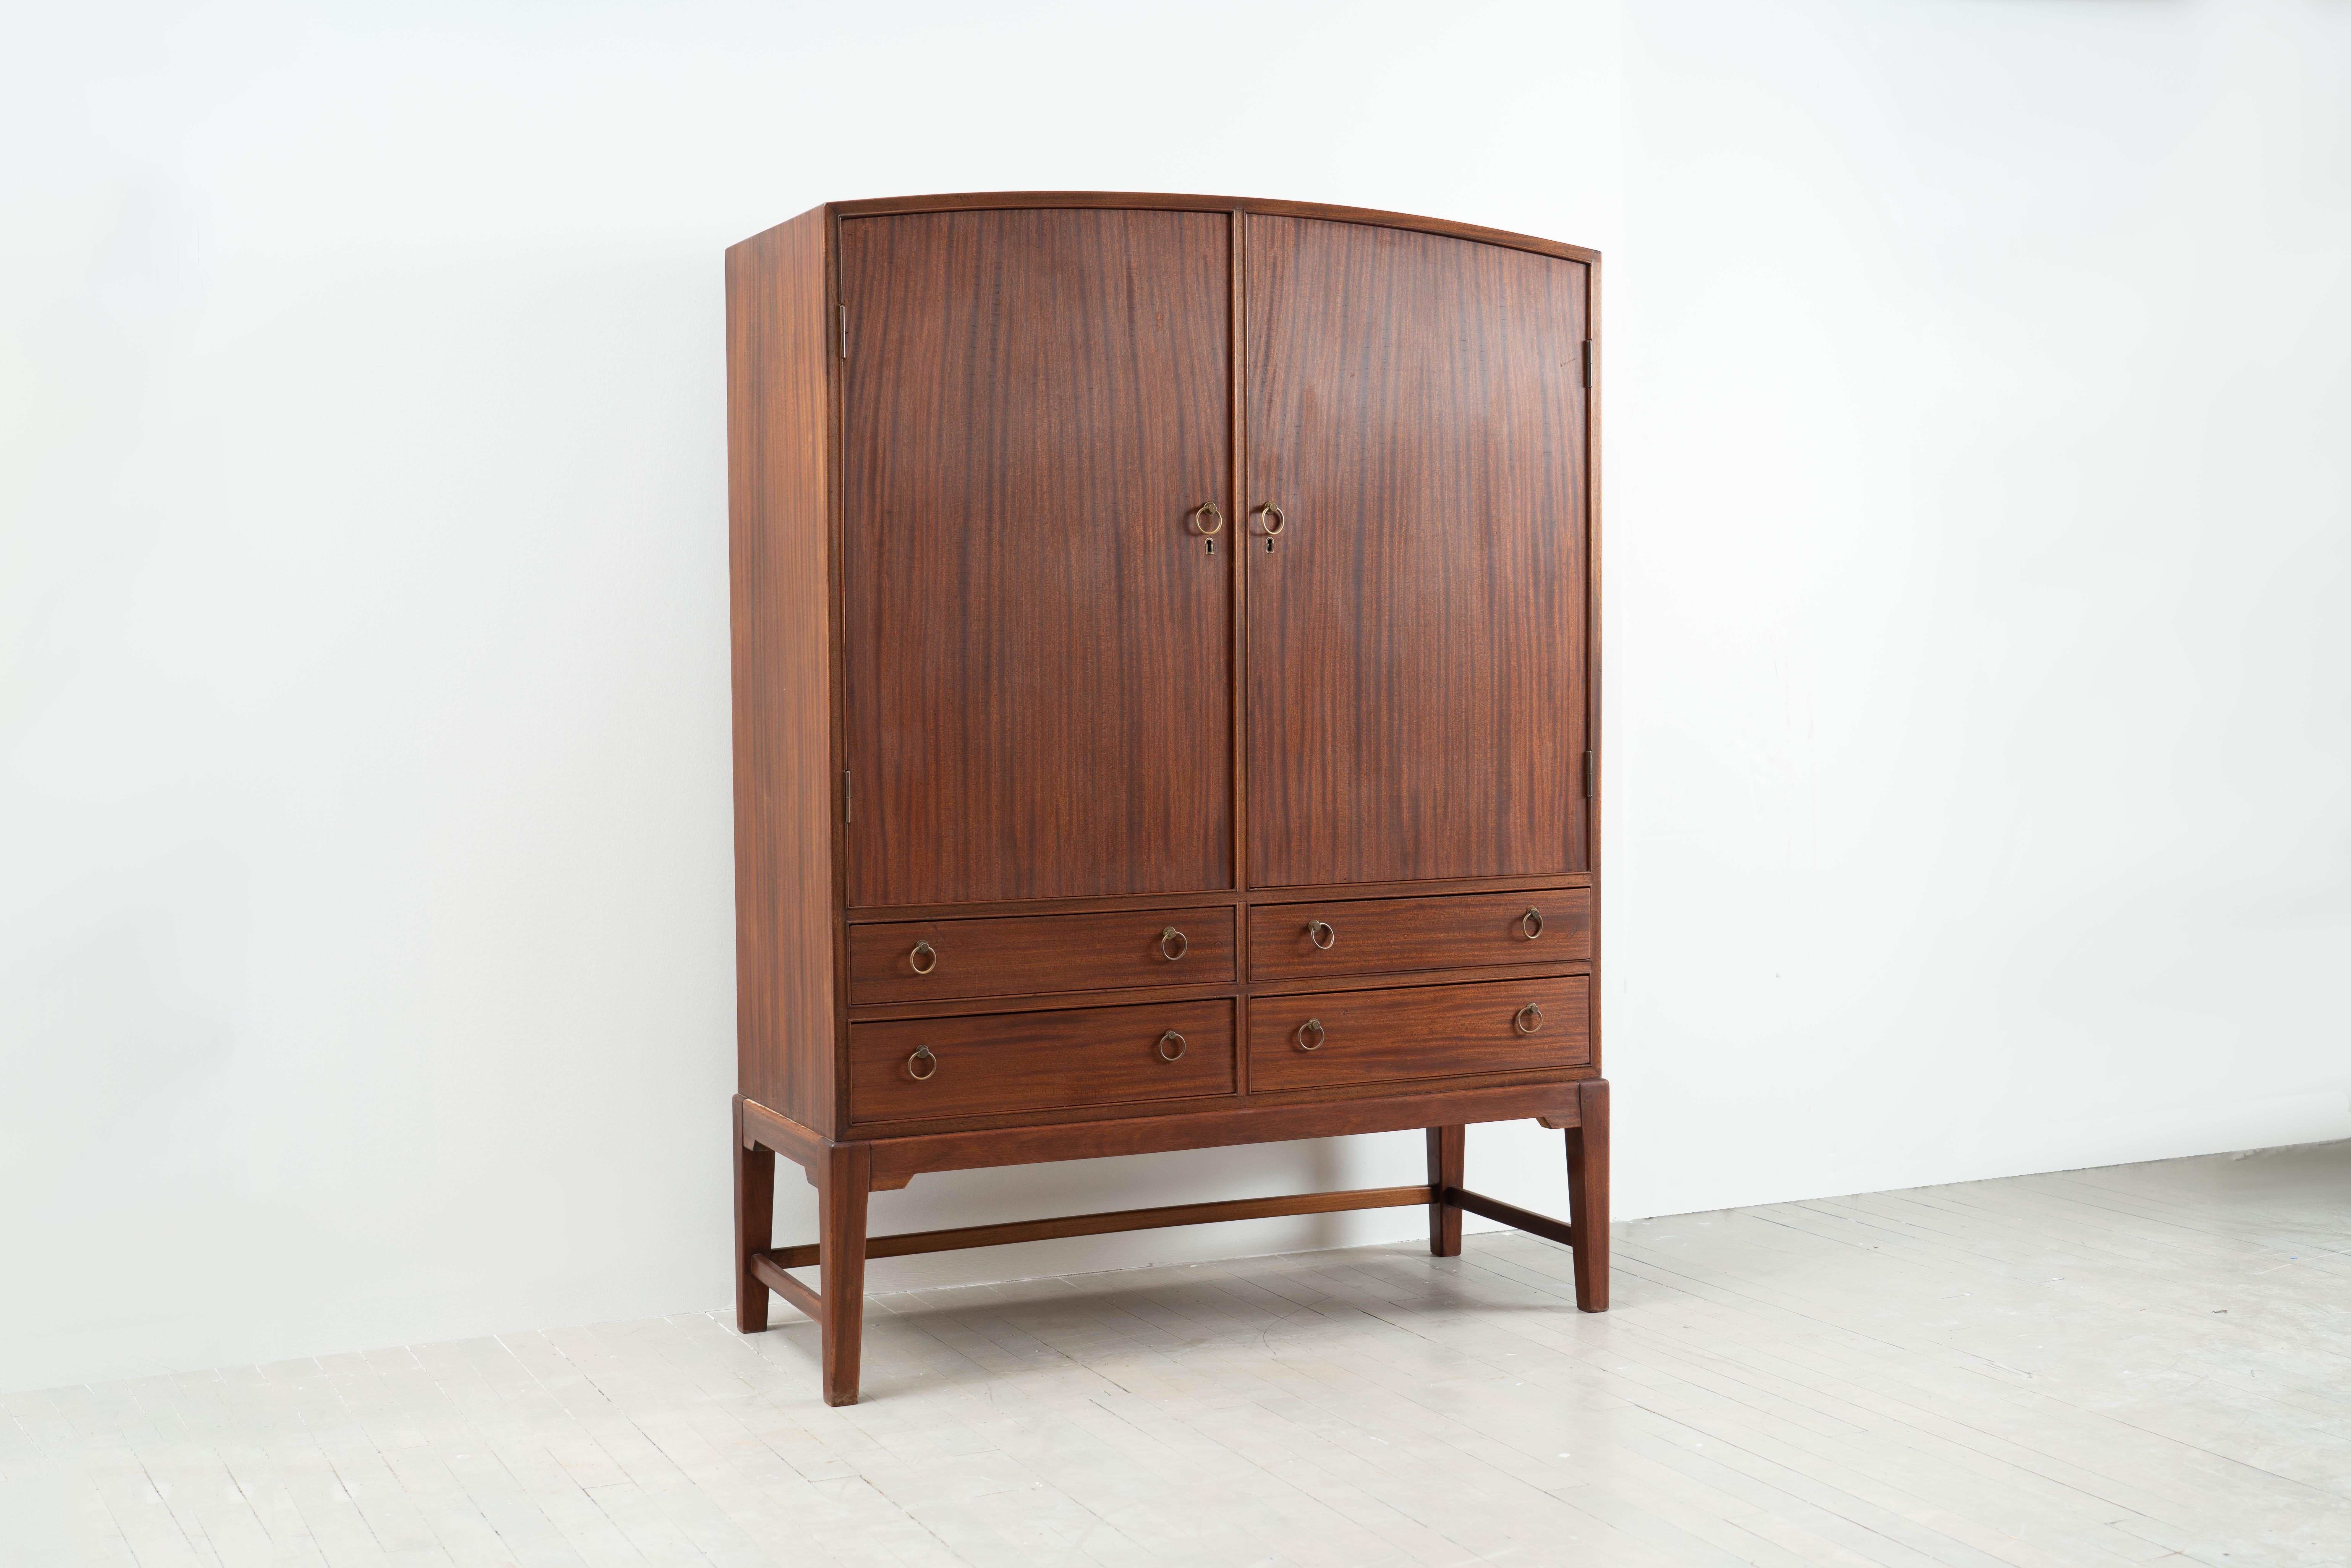 This beautiful arched top mahogany cabinet by Ole Wanscher retains its original oiled finish and brass hardware. Two keyed doors open to reveal adjustable shelves and four lower drawers offer additional storage.